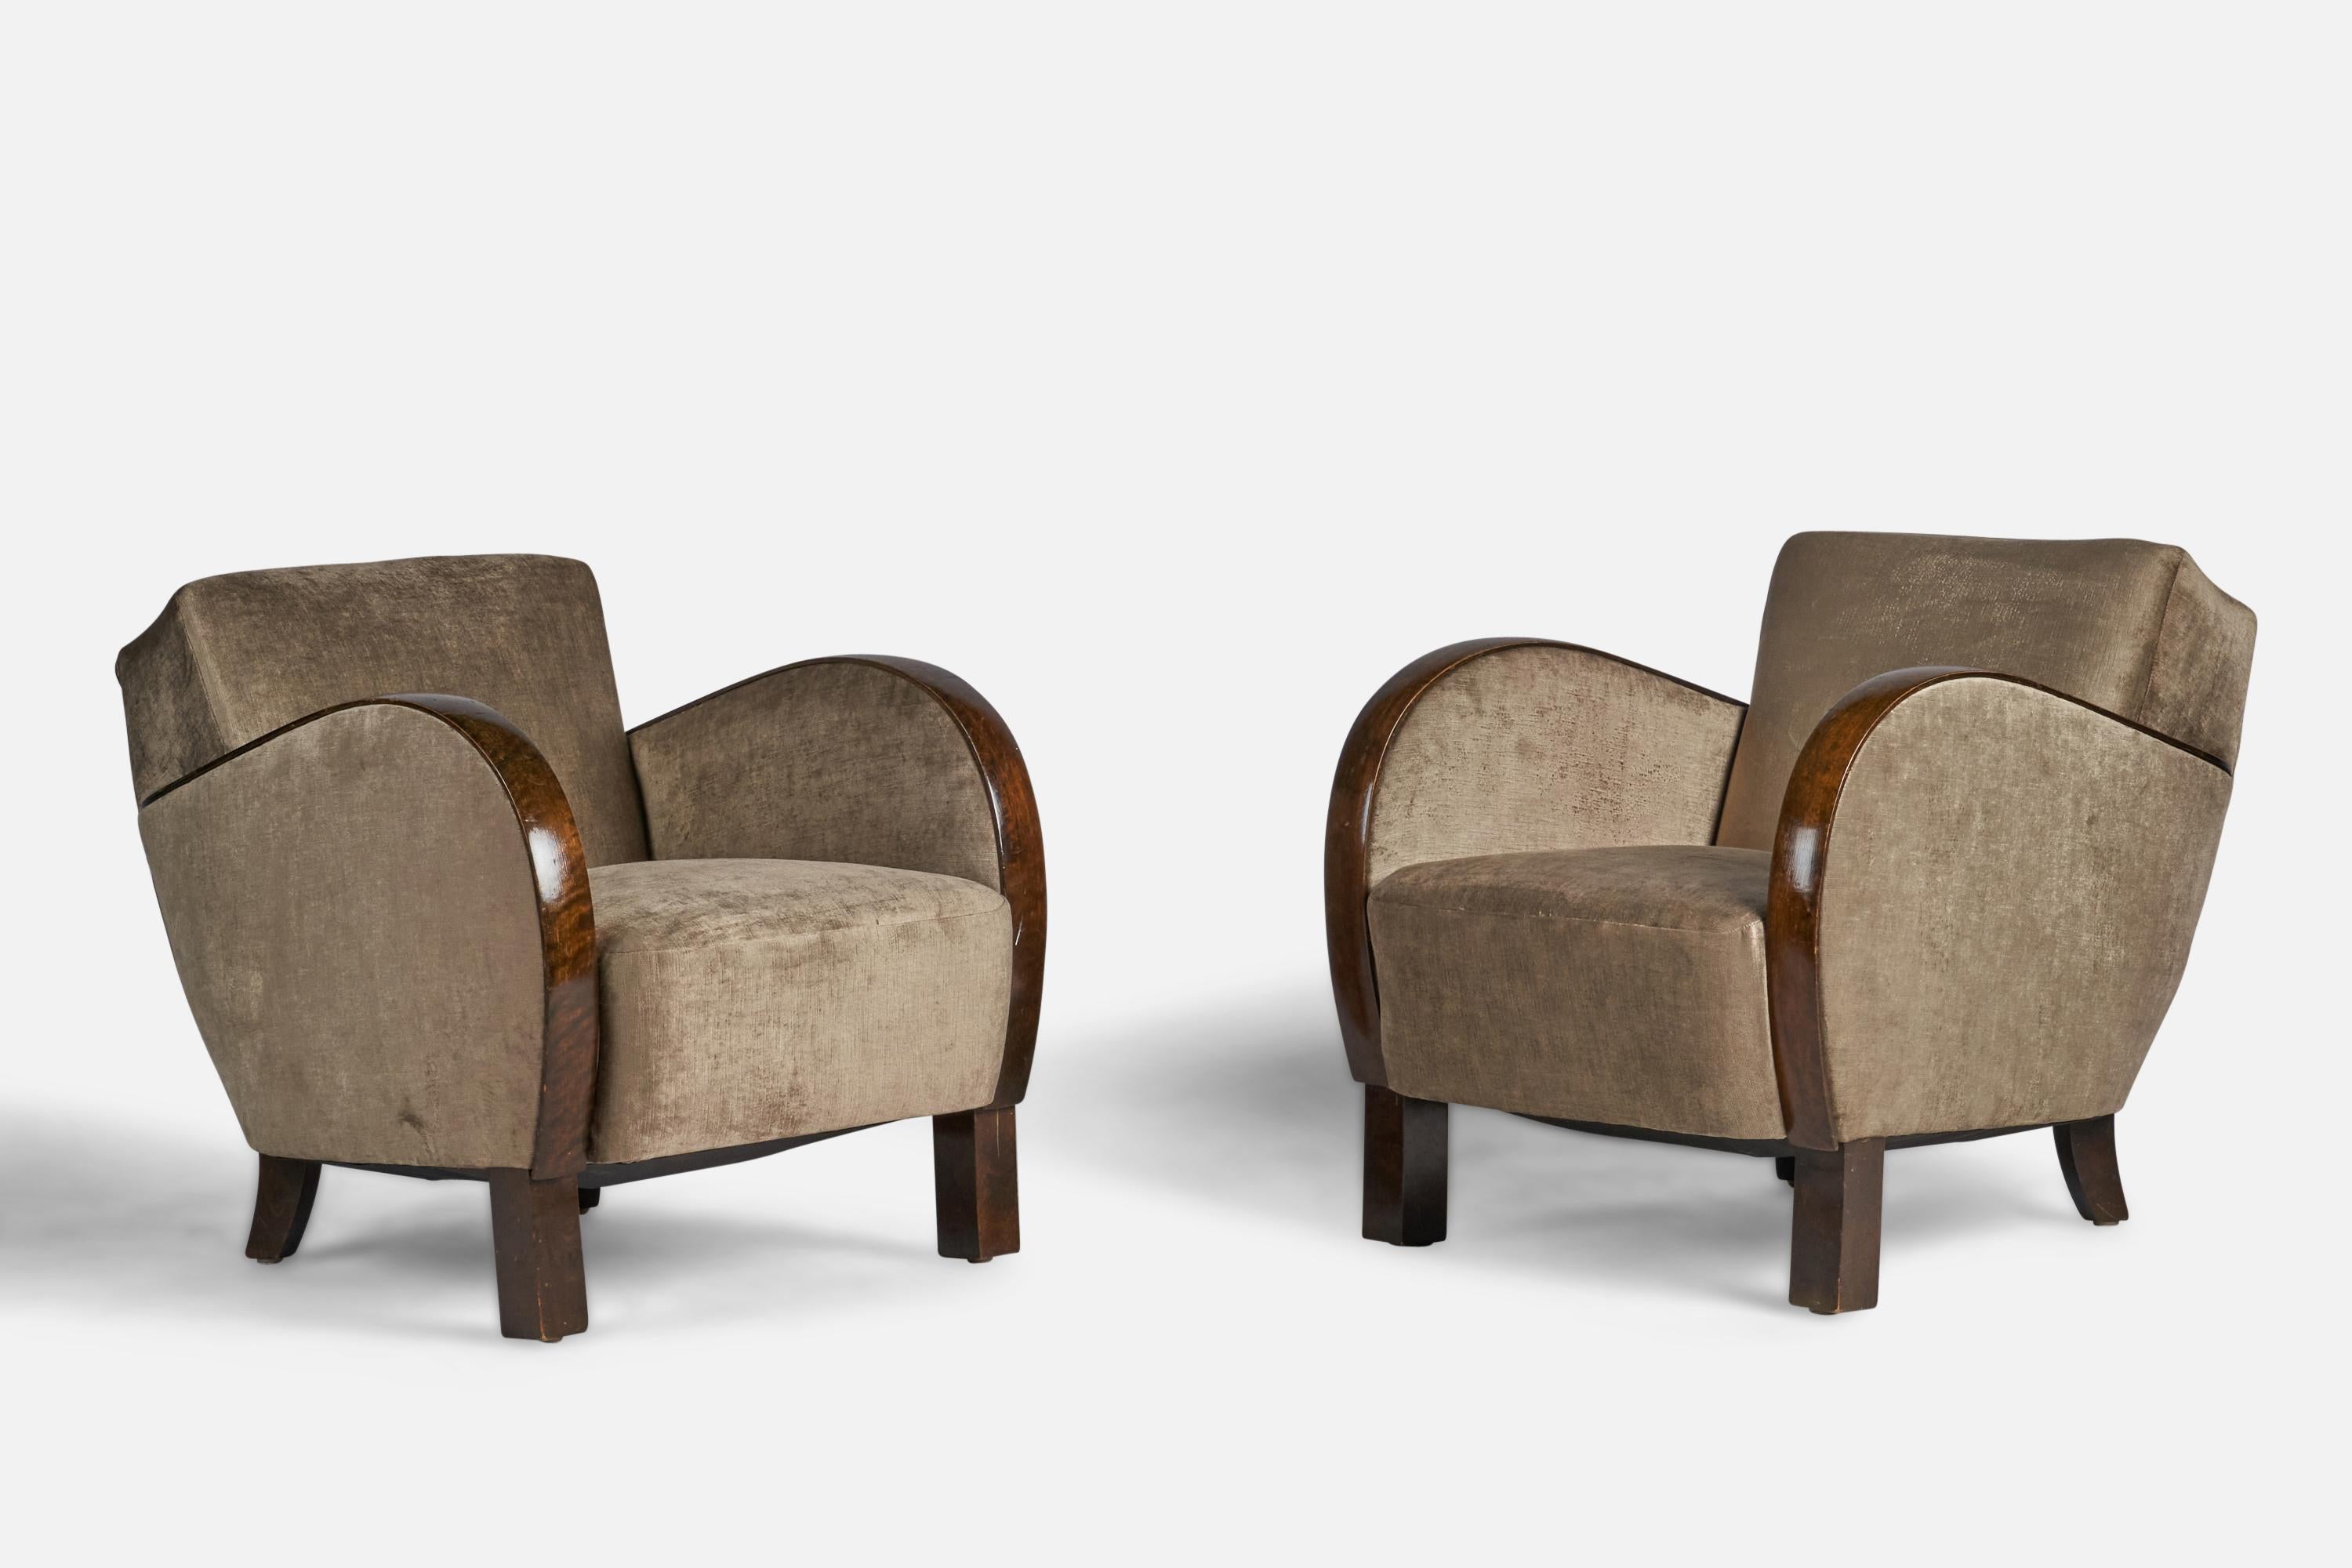 A pair of stained birch and grey velvet lounge chairs designed and produced in Sweden, 1930s.

16.5” seat height